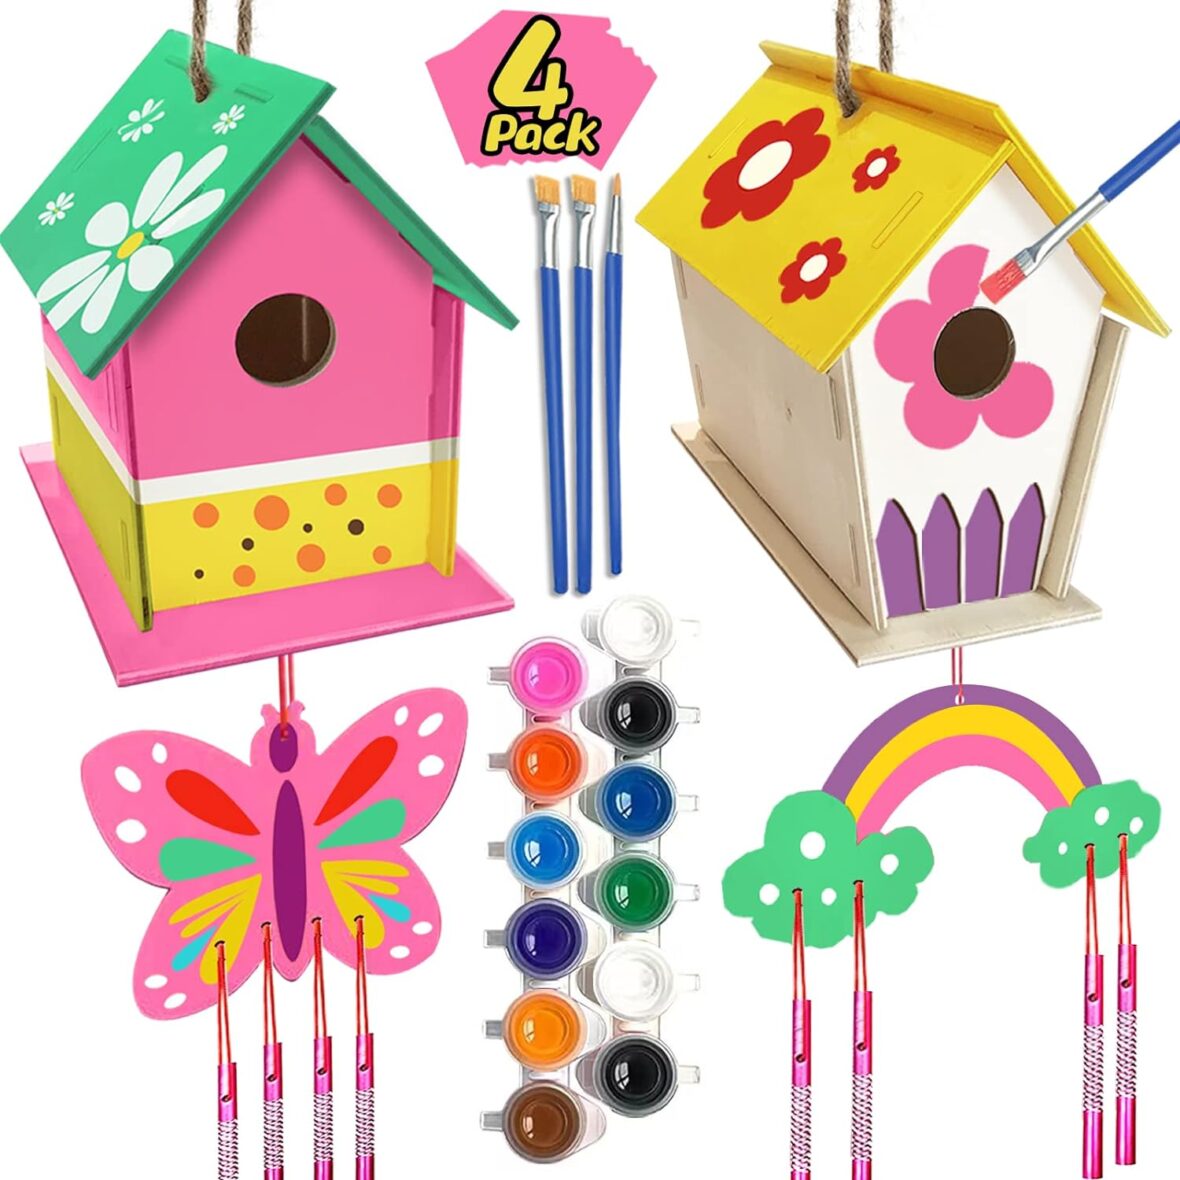 Crafts for Kids Ages 4-8 – 4 Pack DIY Bird House Wind Chime Kit – Build and Paint Birdhouses Wooden Arts Kits